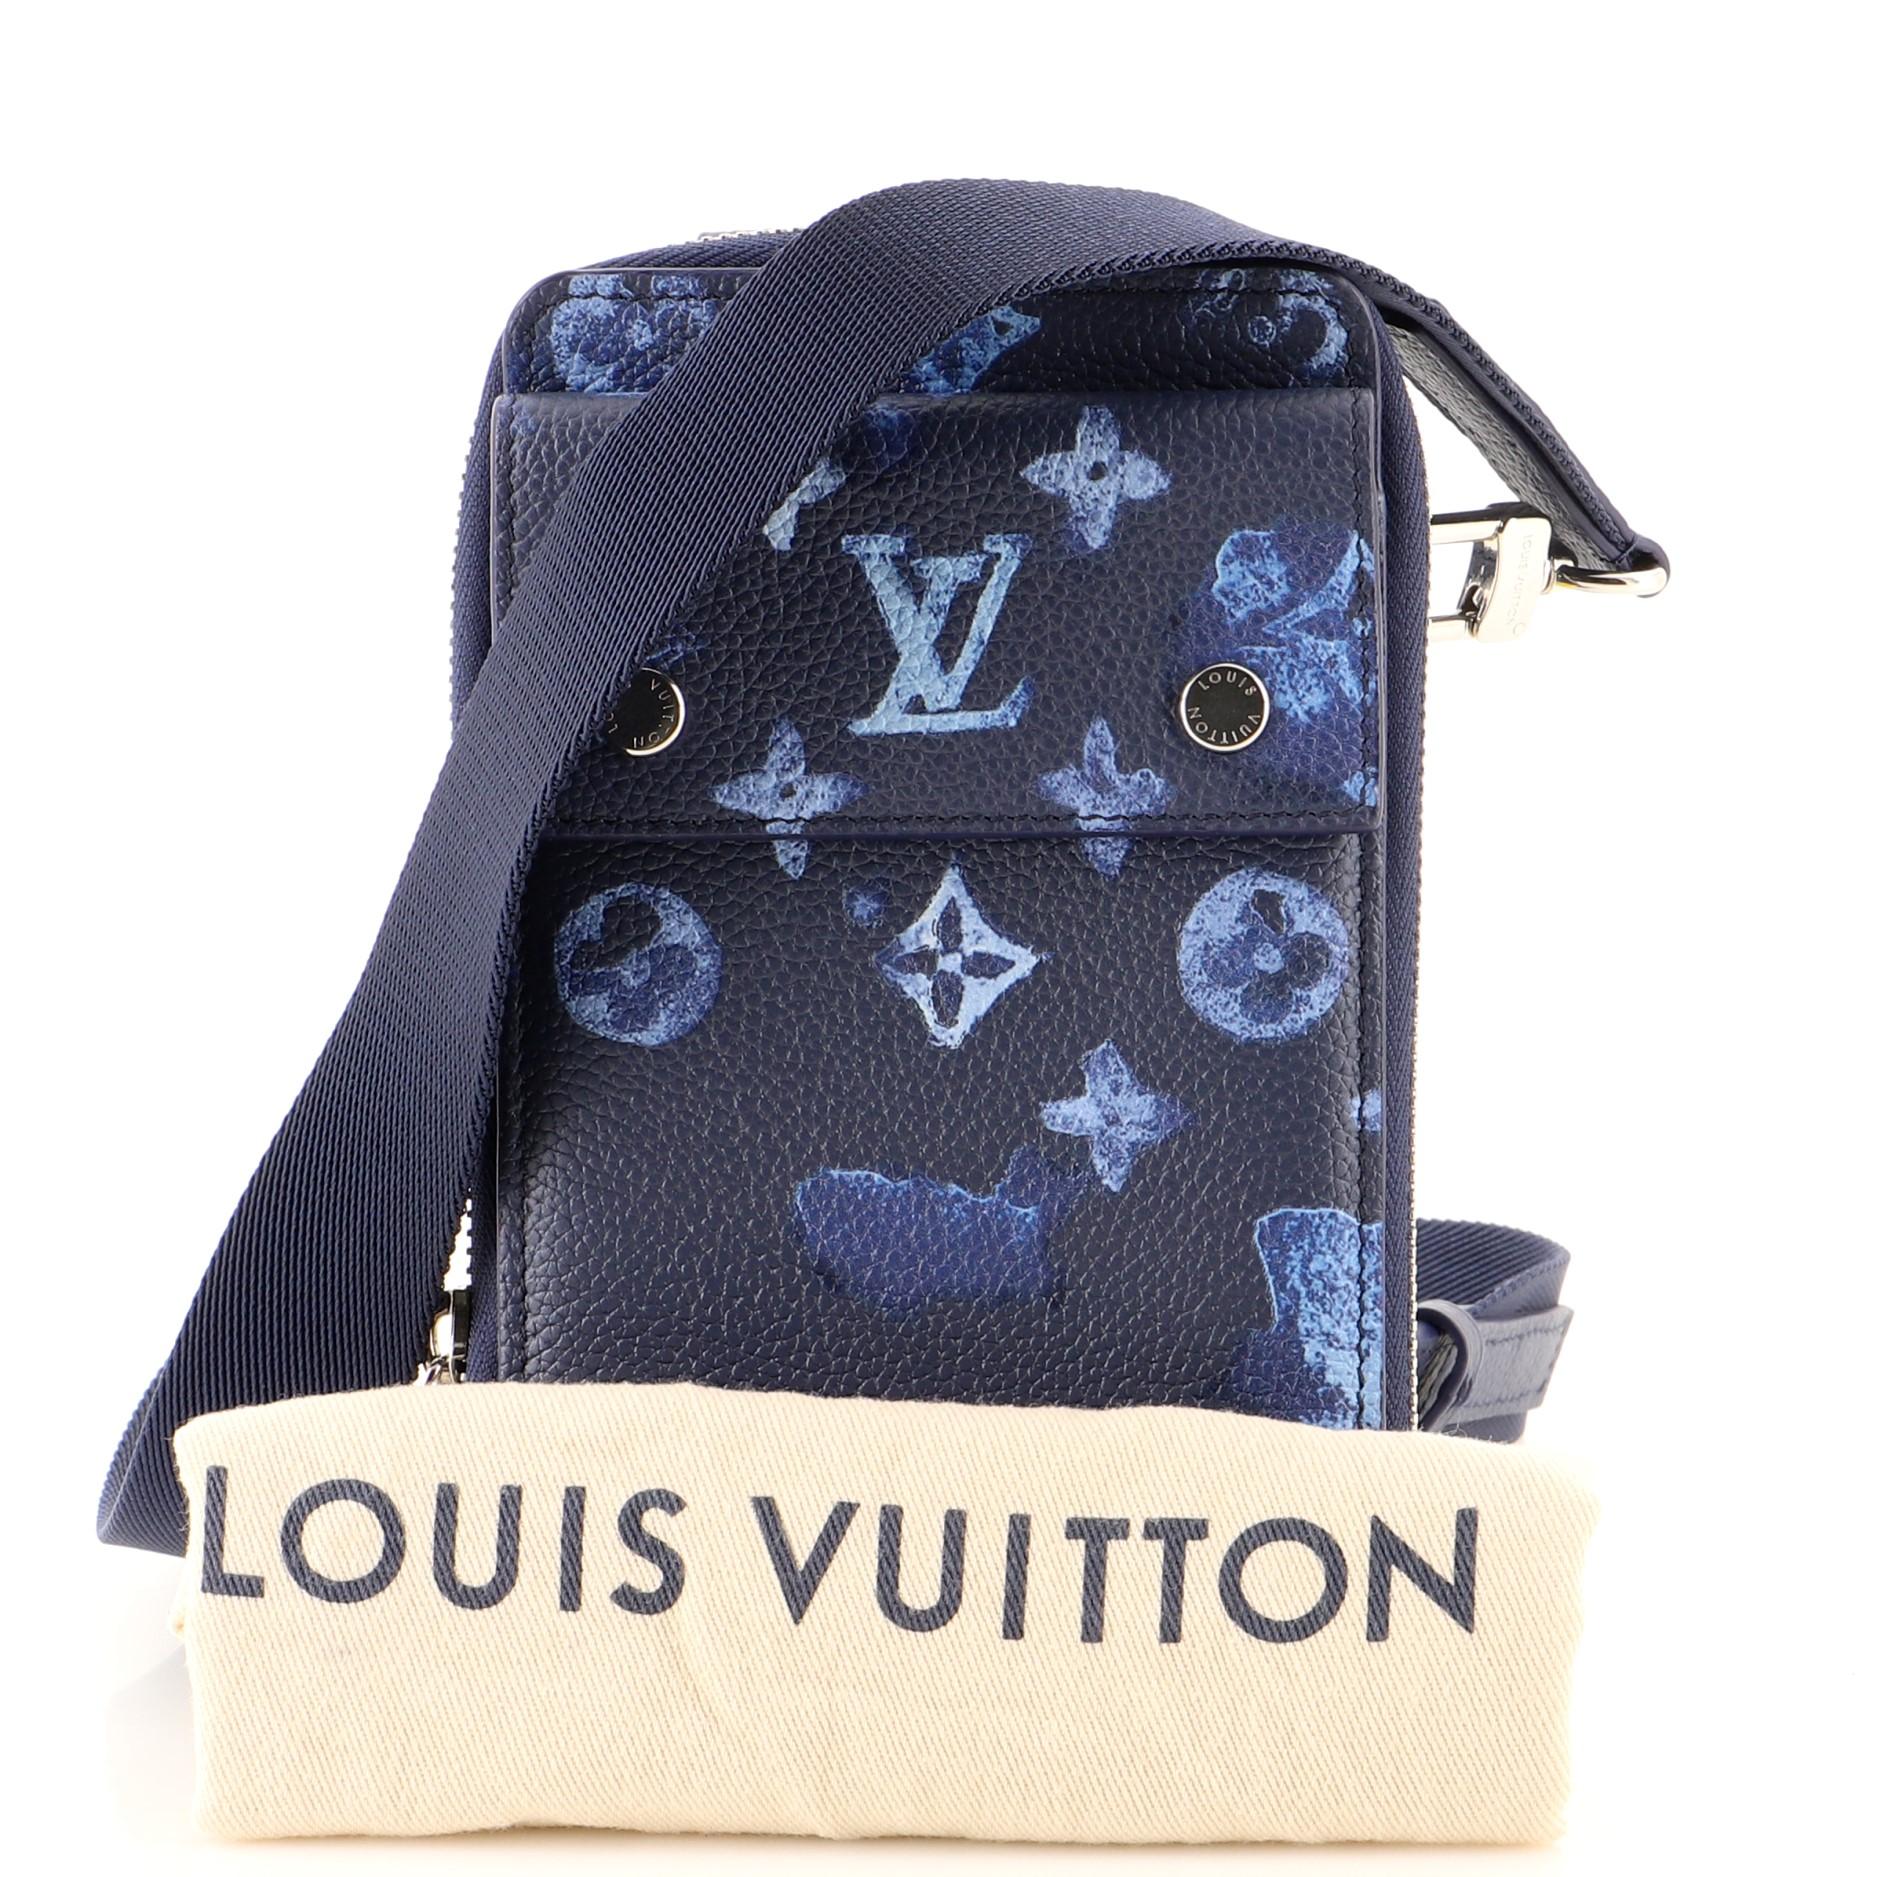 Blue Louis Vuitton Phone Case - 2 For Sale on 1stDibs